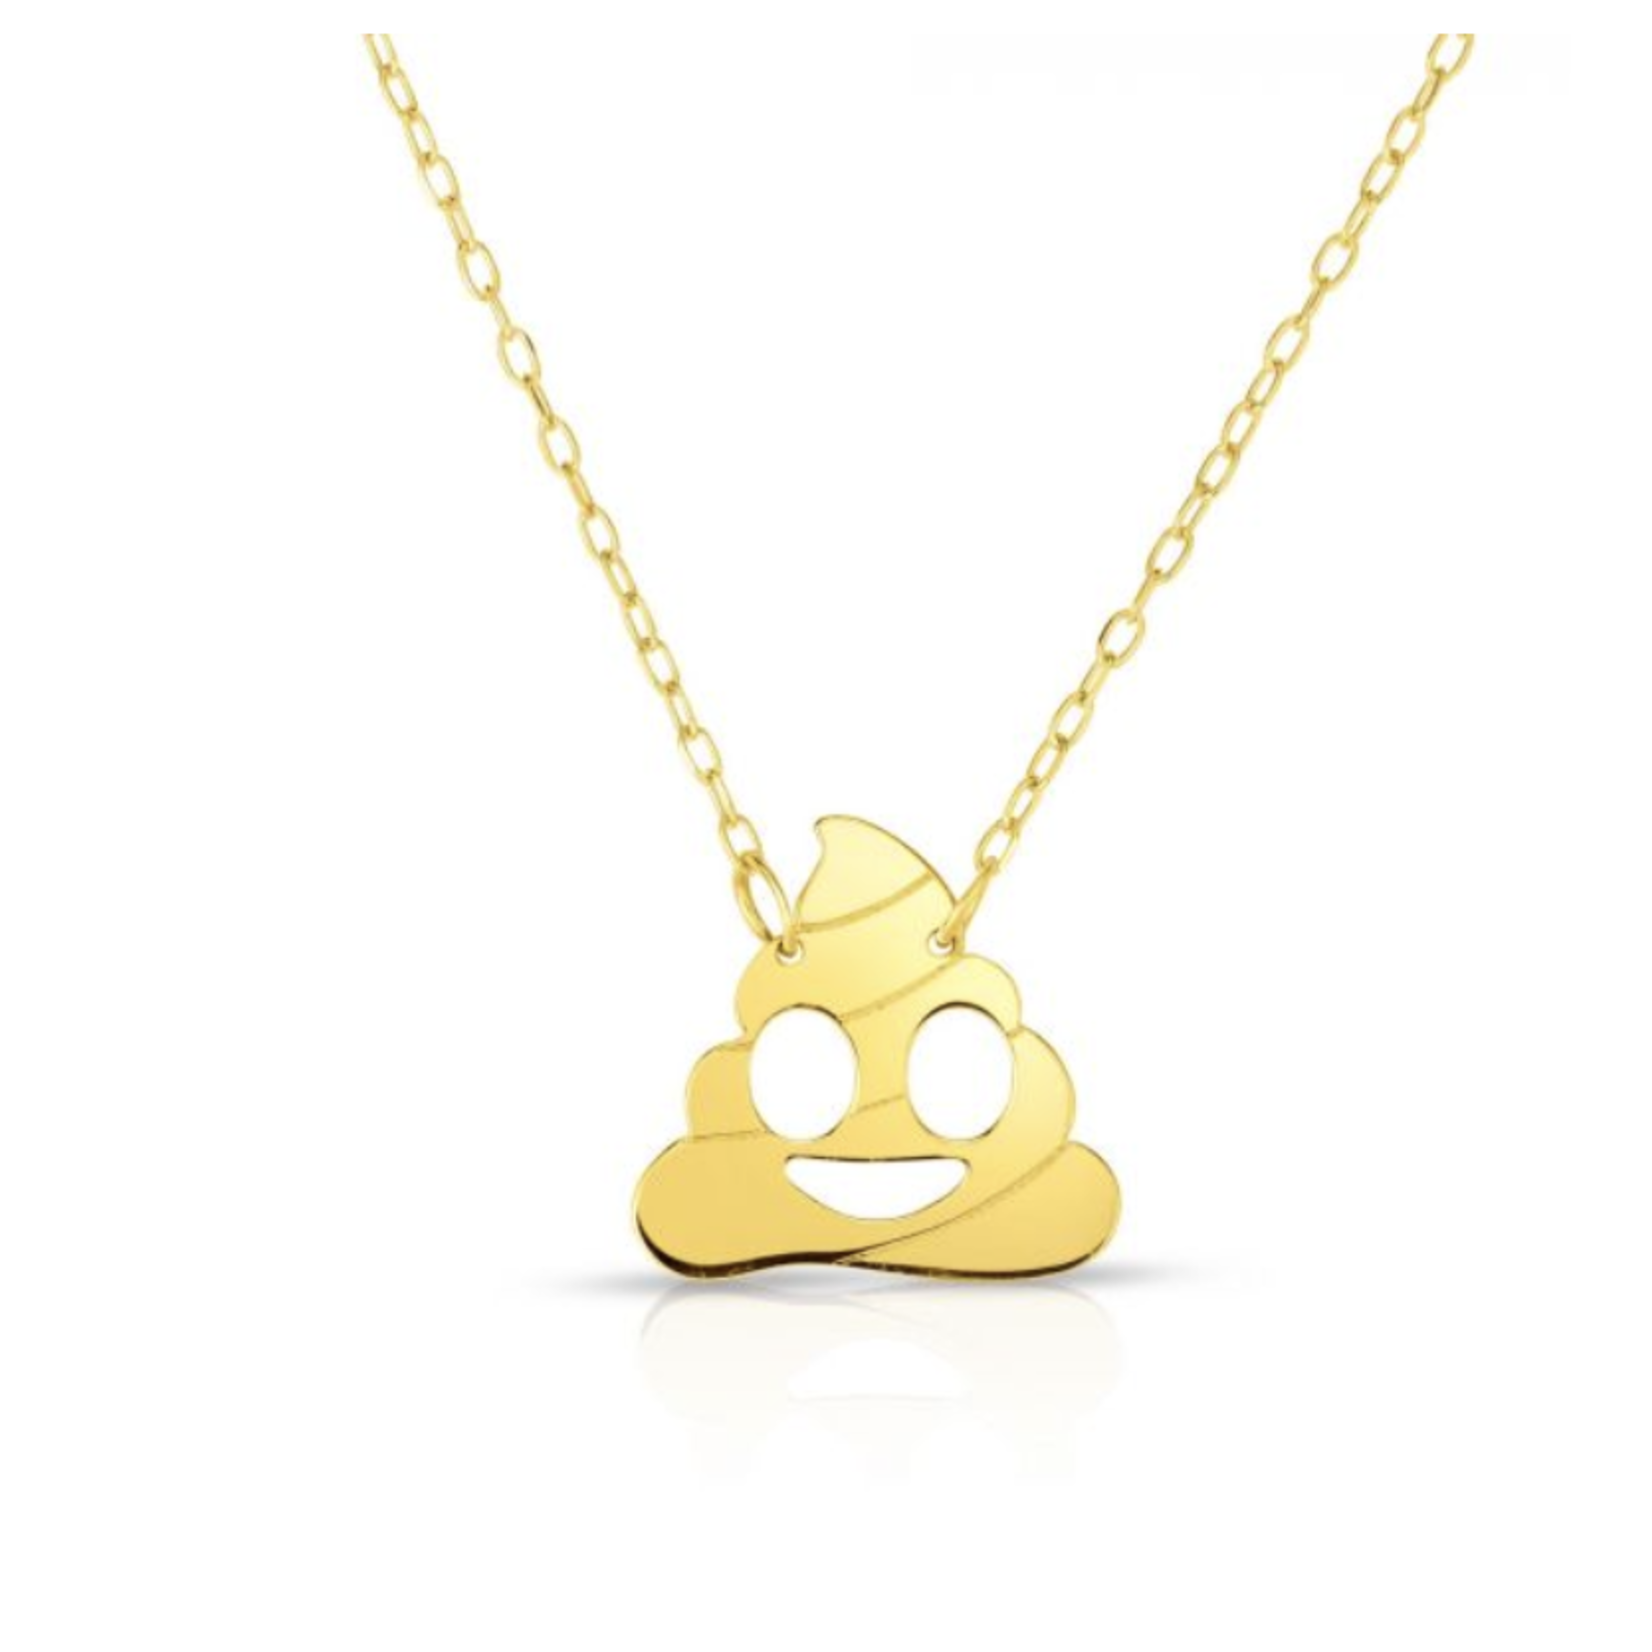 Royal Chain 14K Gold Poop Necklace